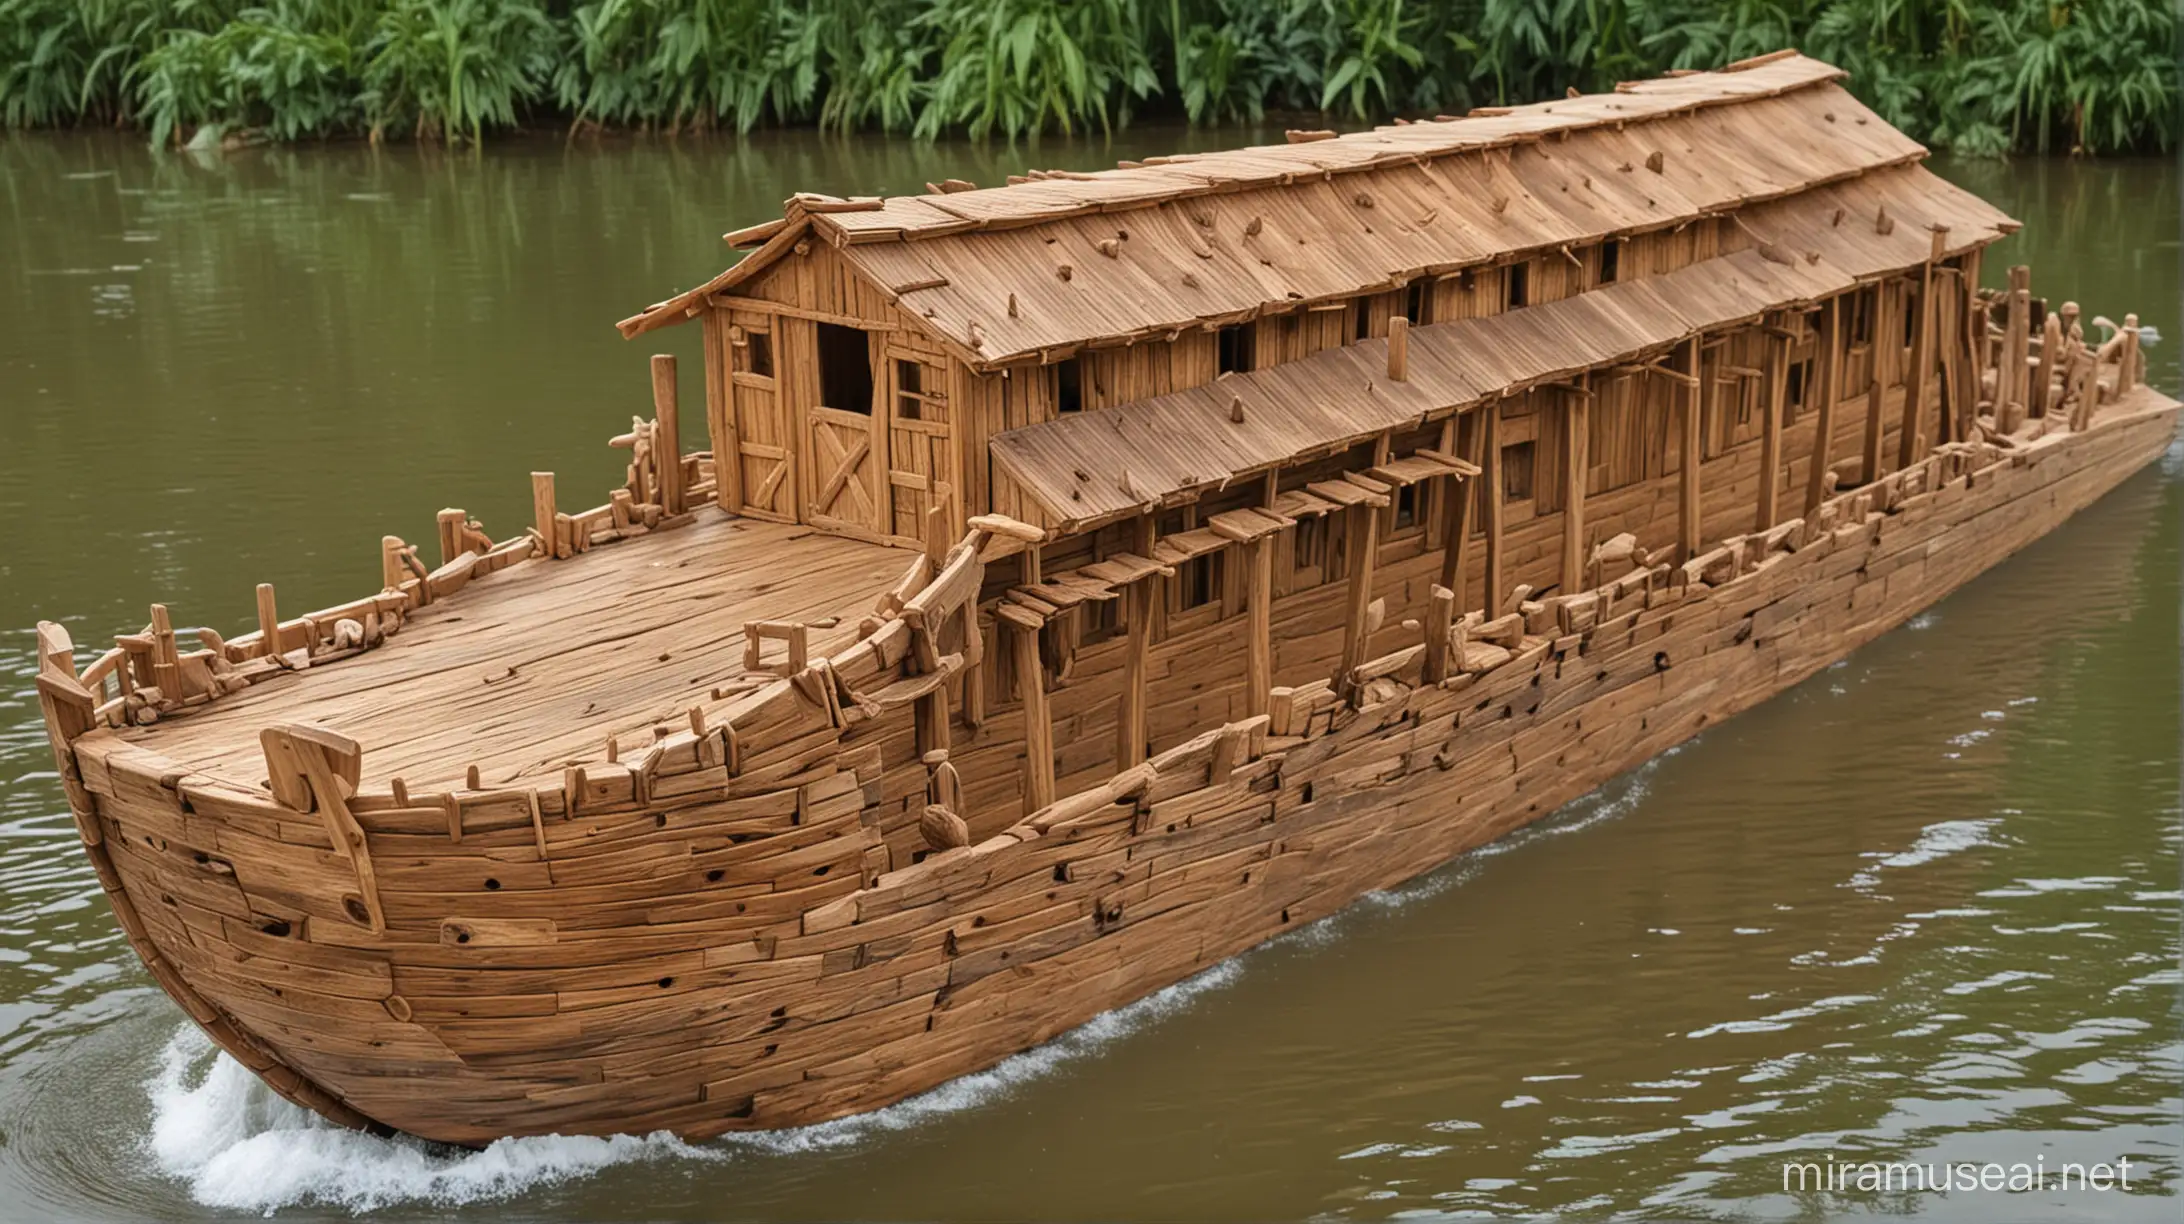 Noahs Ark Constructed of Gopher Wood for Diverse Animal Boarding